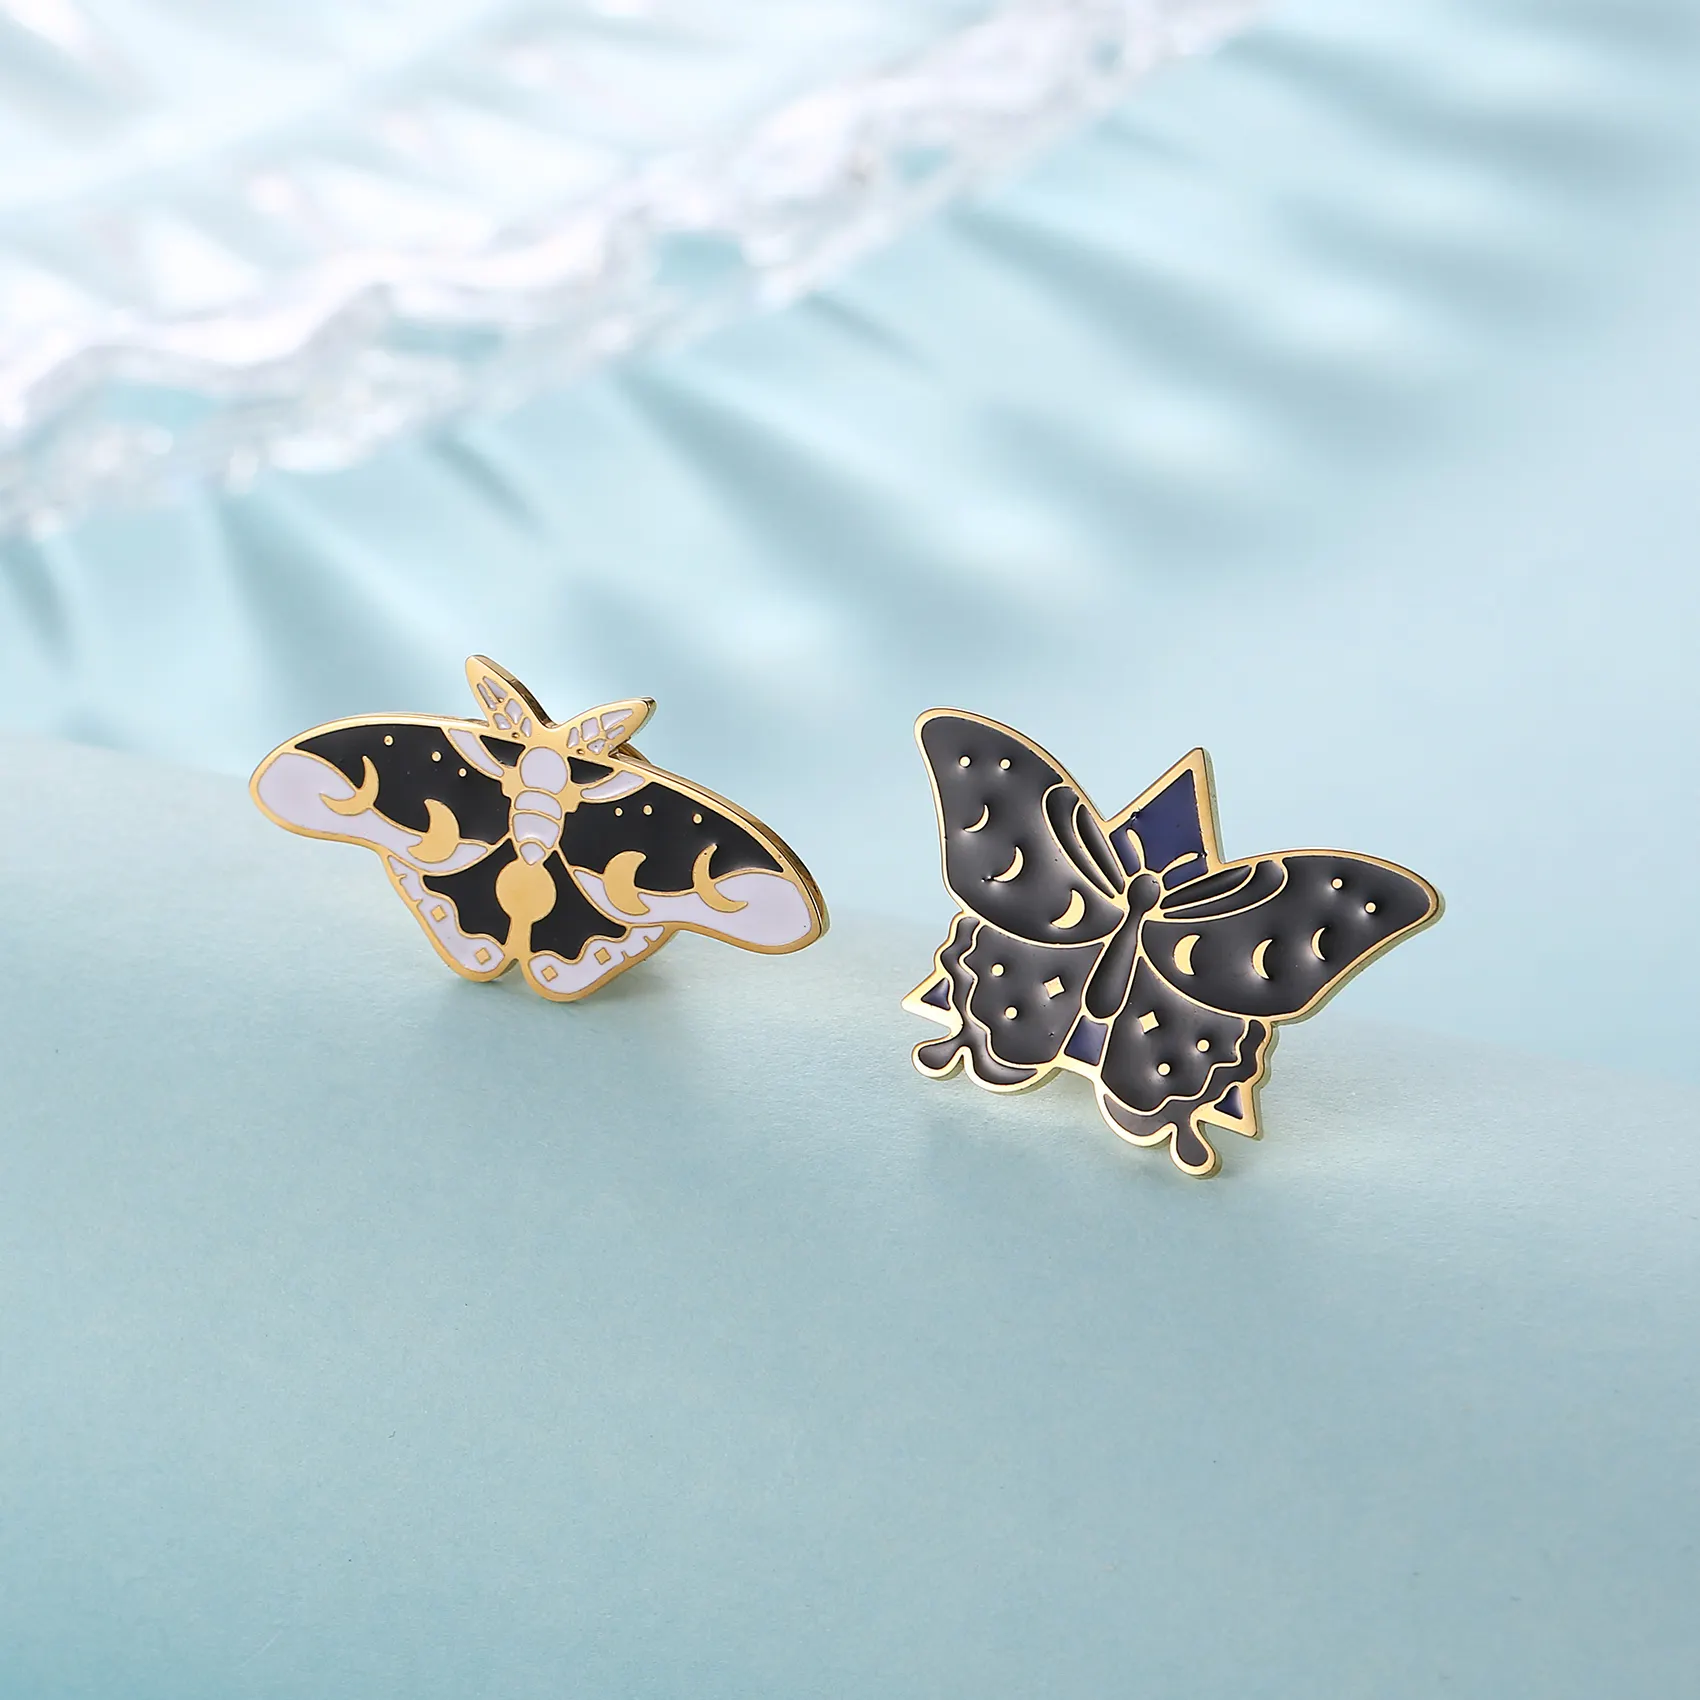 Fashion Universal Cute Brooch Rose Gold Plated 14K Gold Plated Stainless Steel Dinosaur Mushroom Butterfly Brooch